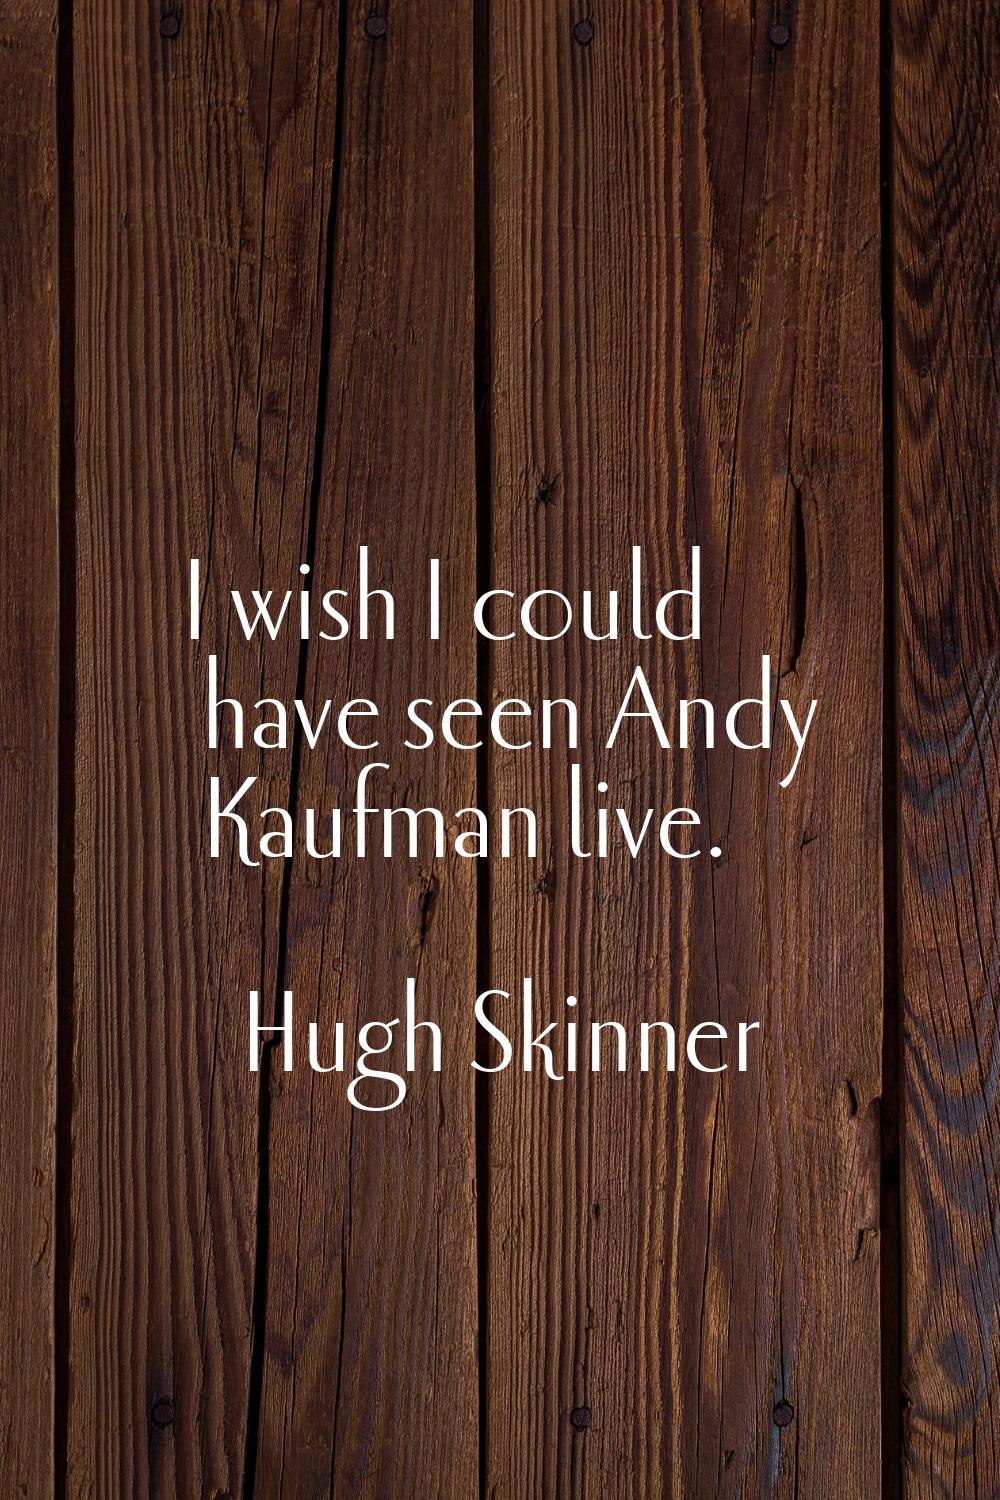 I wish I could have seen Andy Kaufman live.